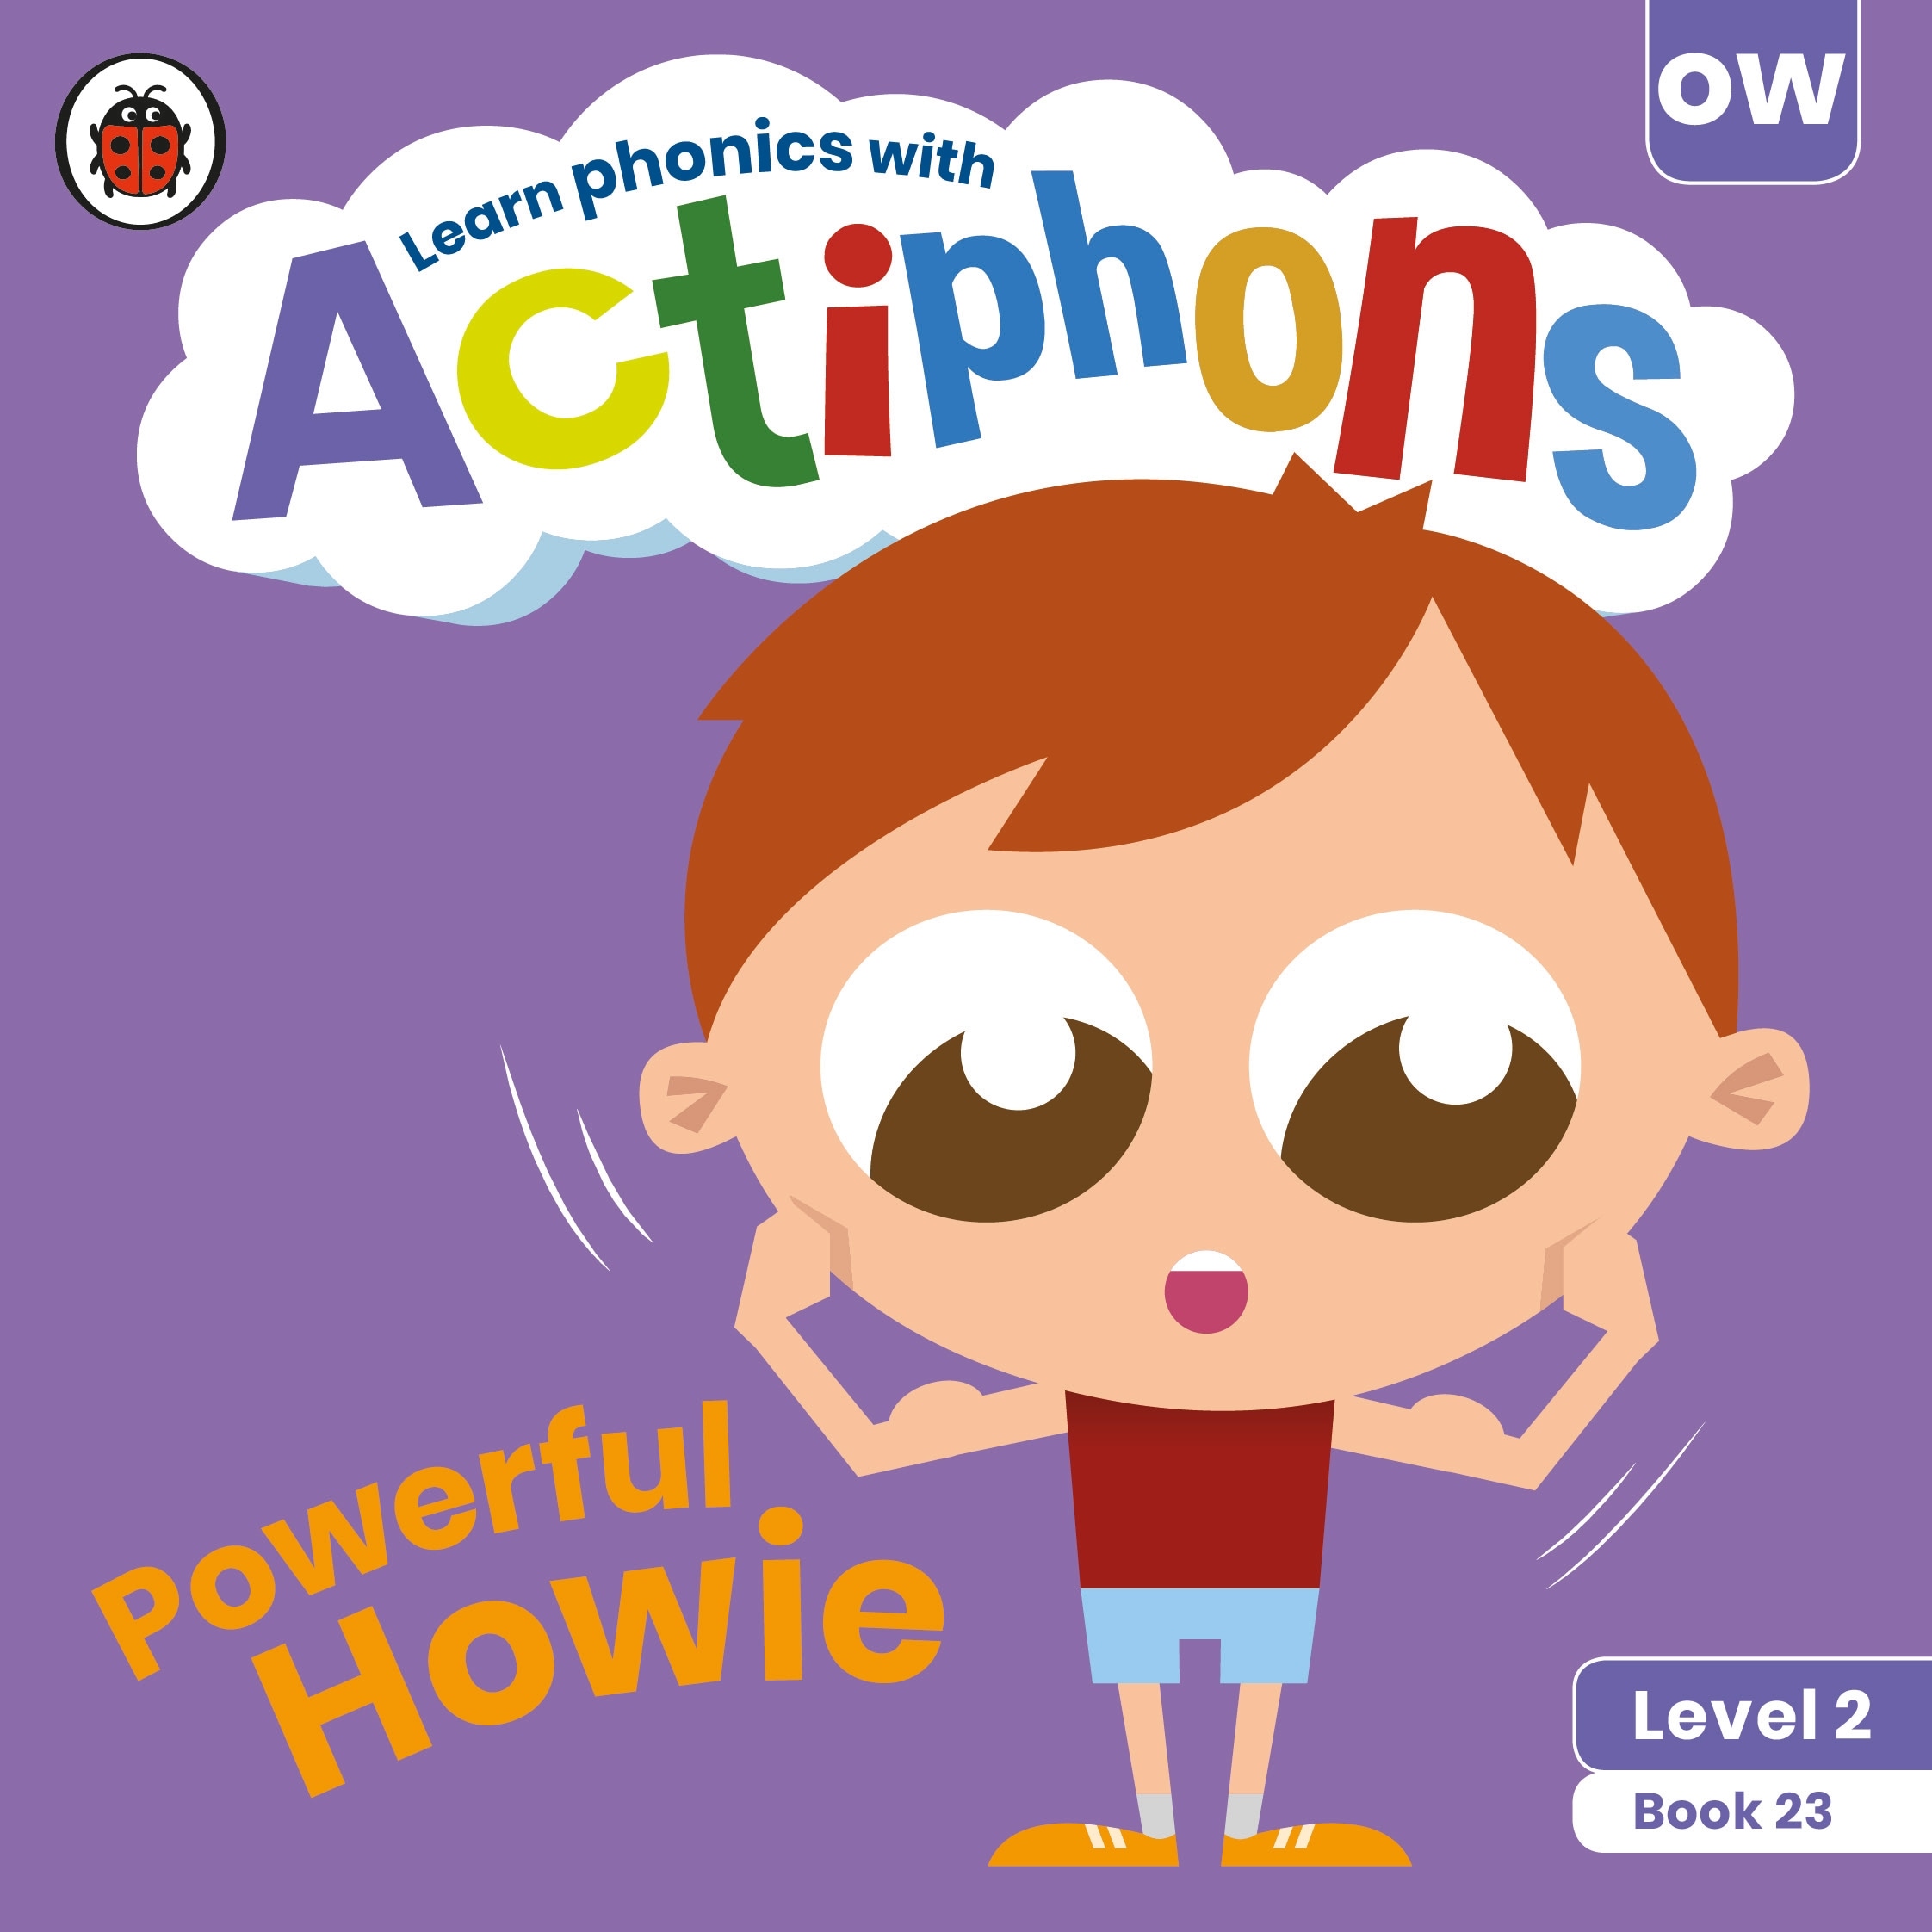 Actiphons Level 2 Book 23 Powerful Howie